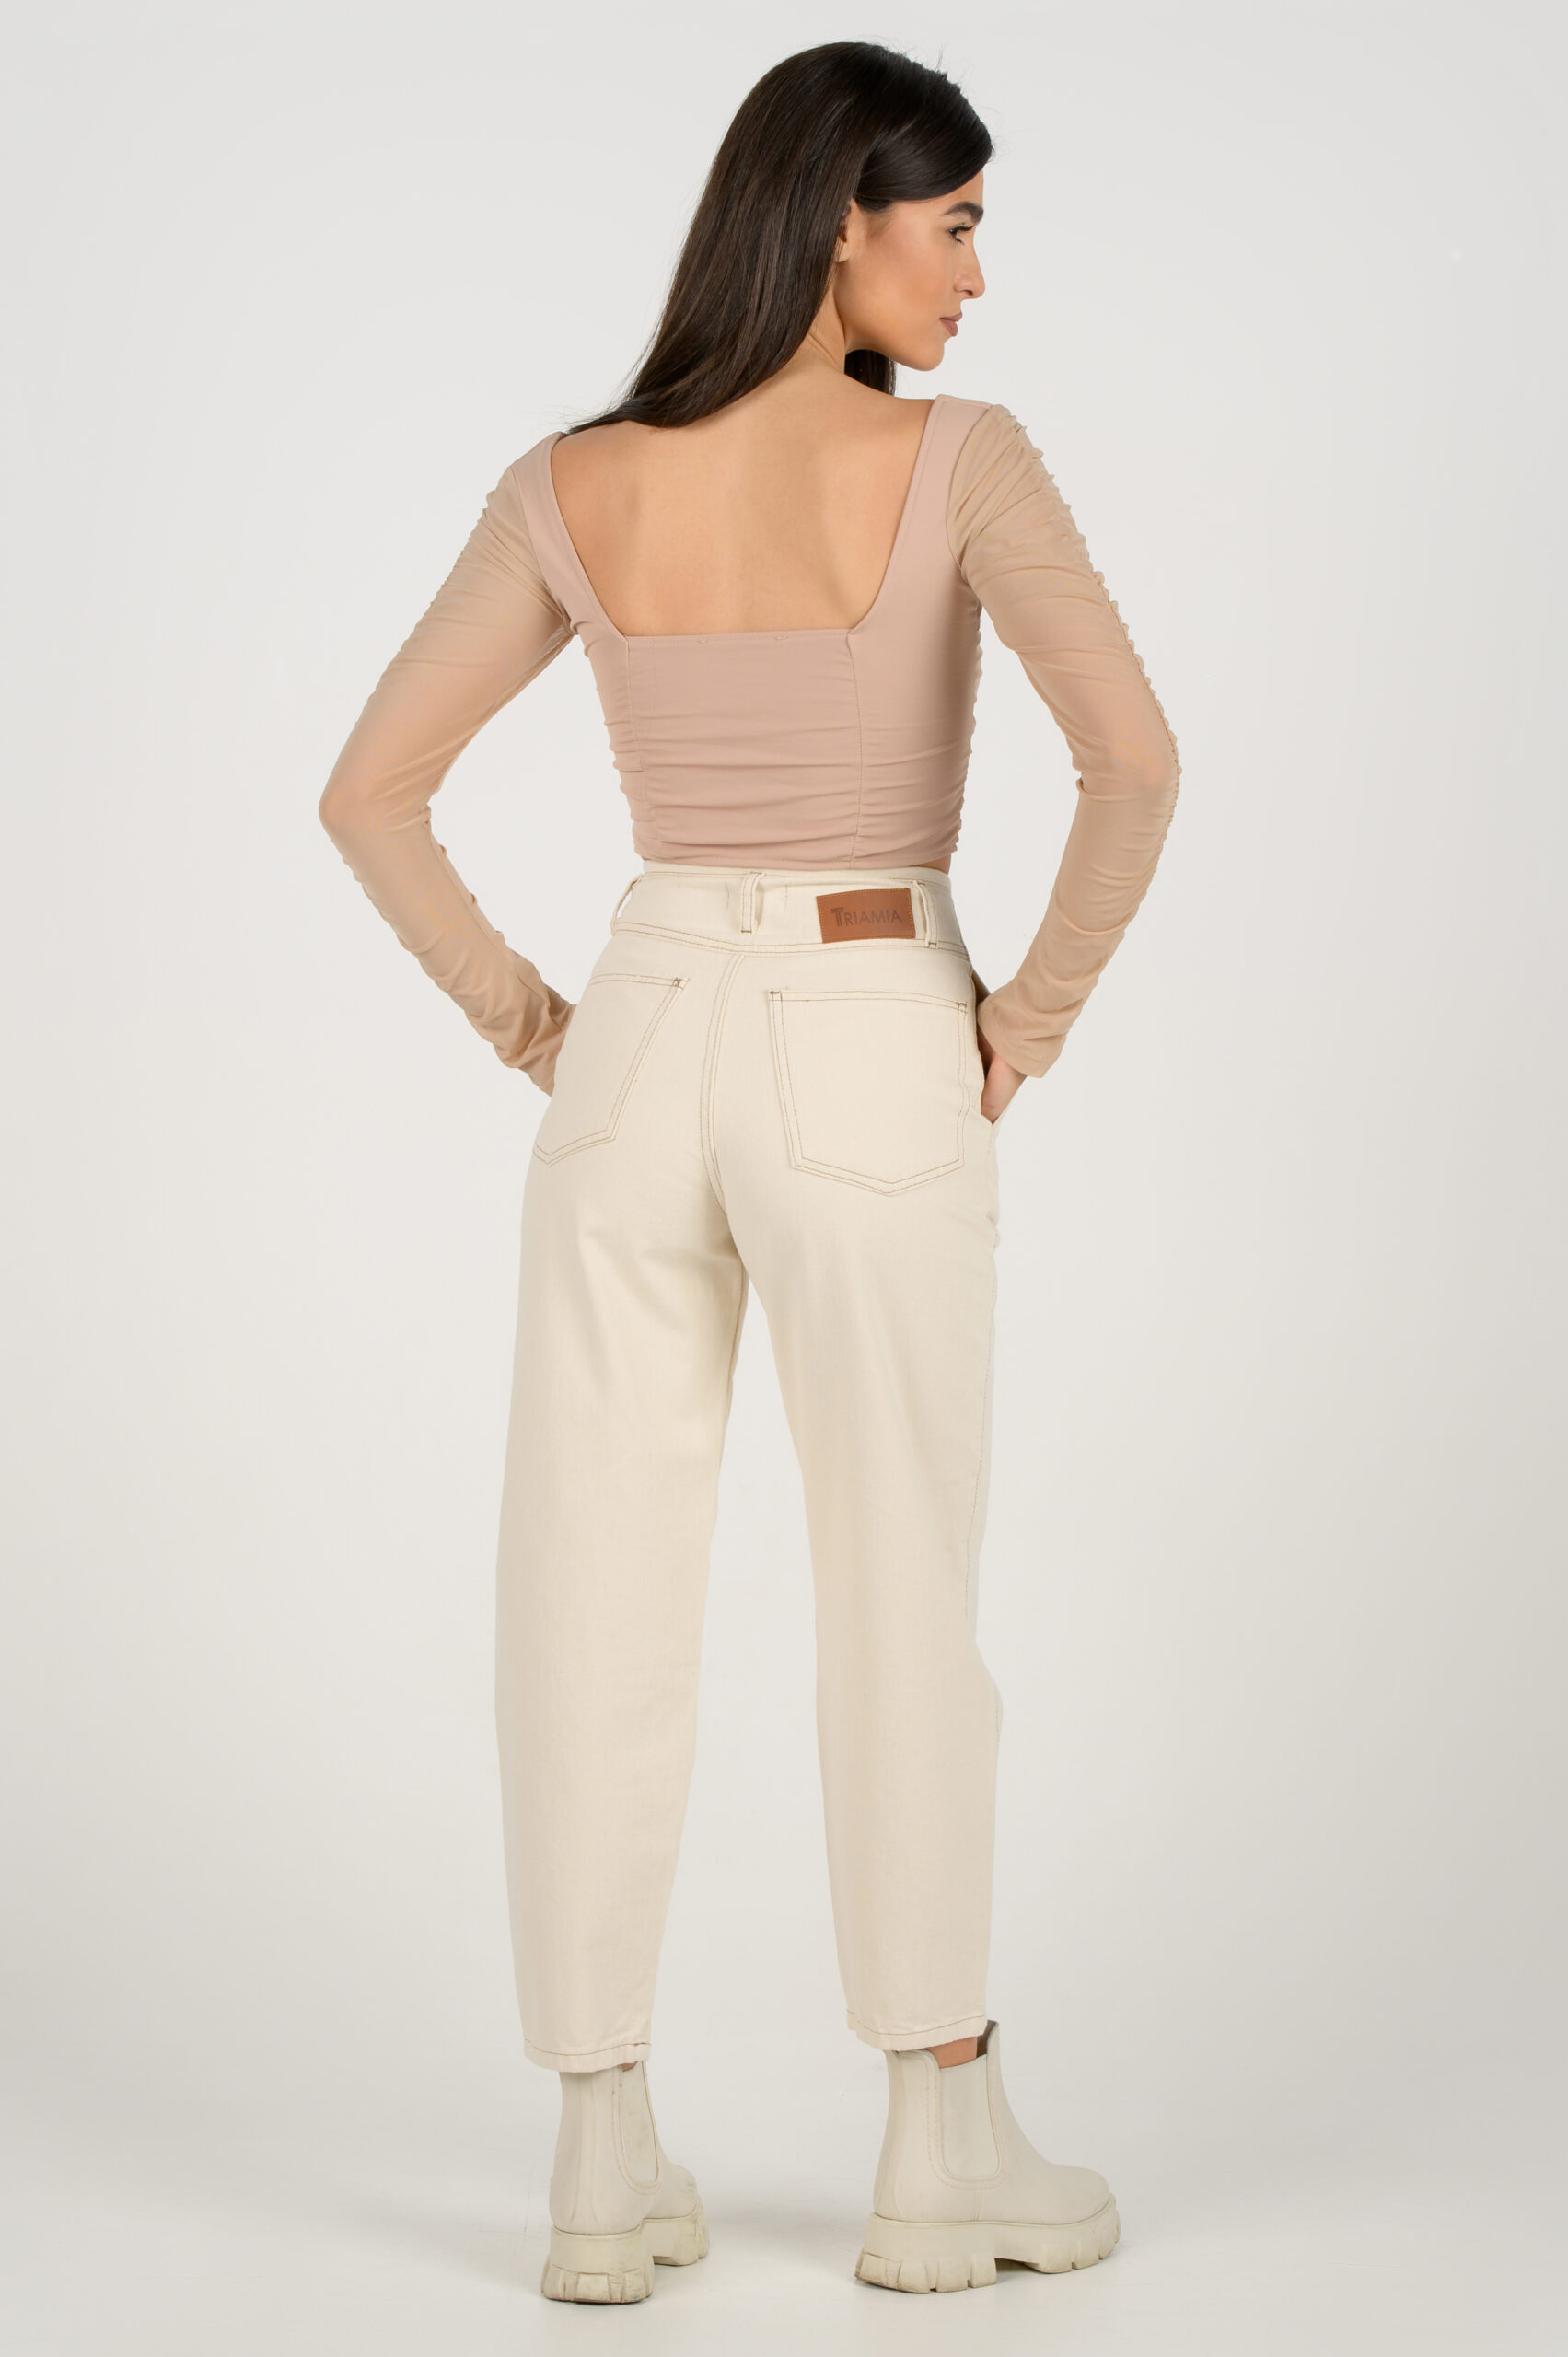 Ivory balloon high-waisted jeans, back side.